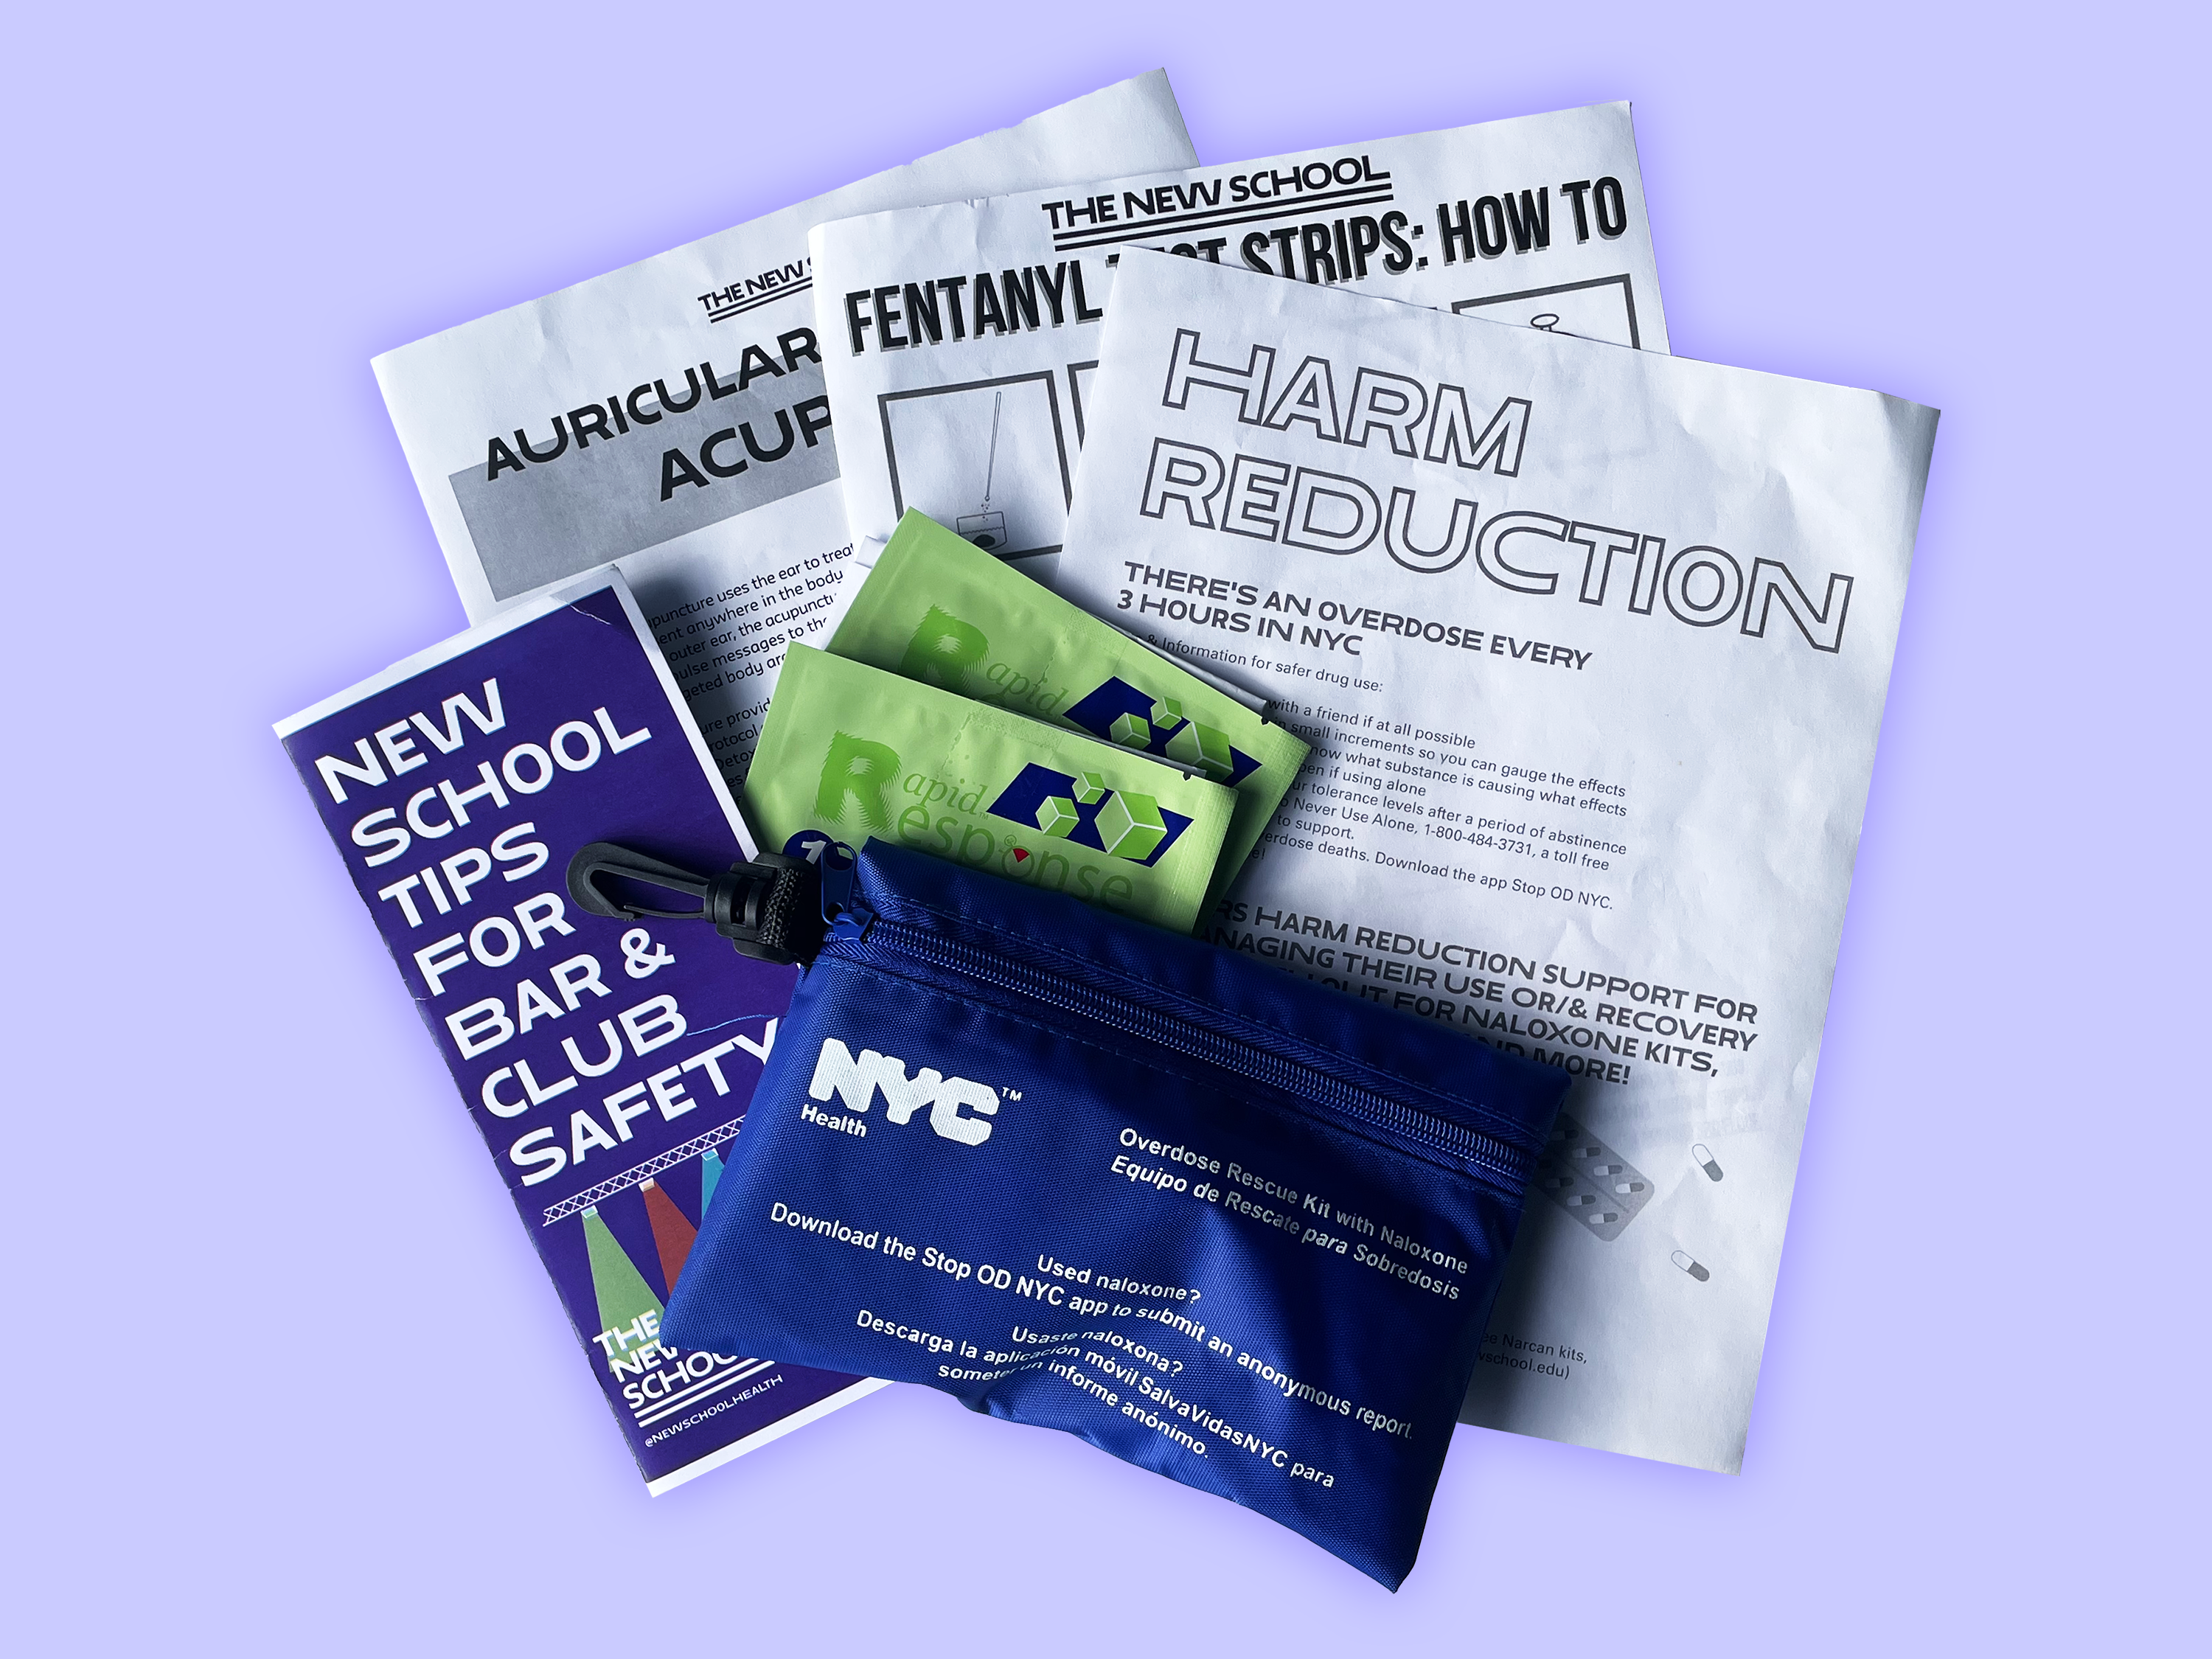 On a light blue background is a spread of harm reduction resources offered by Student Health Services at The New School. There are four pamphlets from left to right reading “New School Tips for Bar and Club Safety,” “Auricular Acupuncture,” “Fentanyl Test Strips: How To,” and “Harm Reduction.” Atop the pamphlets in the middle are two green packets containing fentanyl test strips and a blue bag containing a NYC Department of Health naloxone kit.